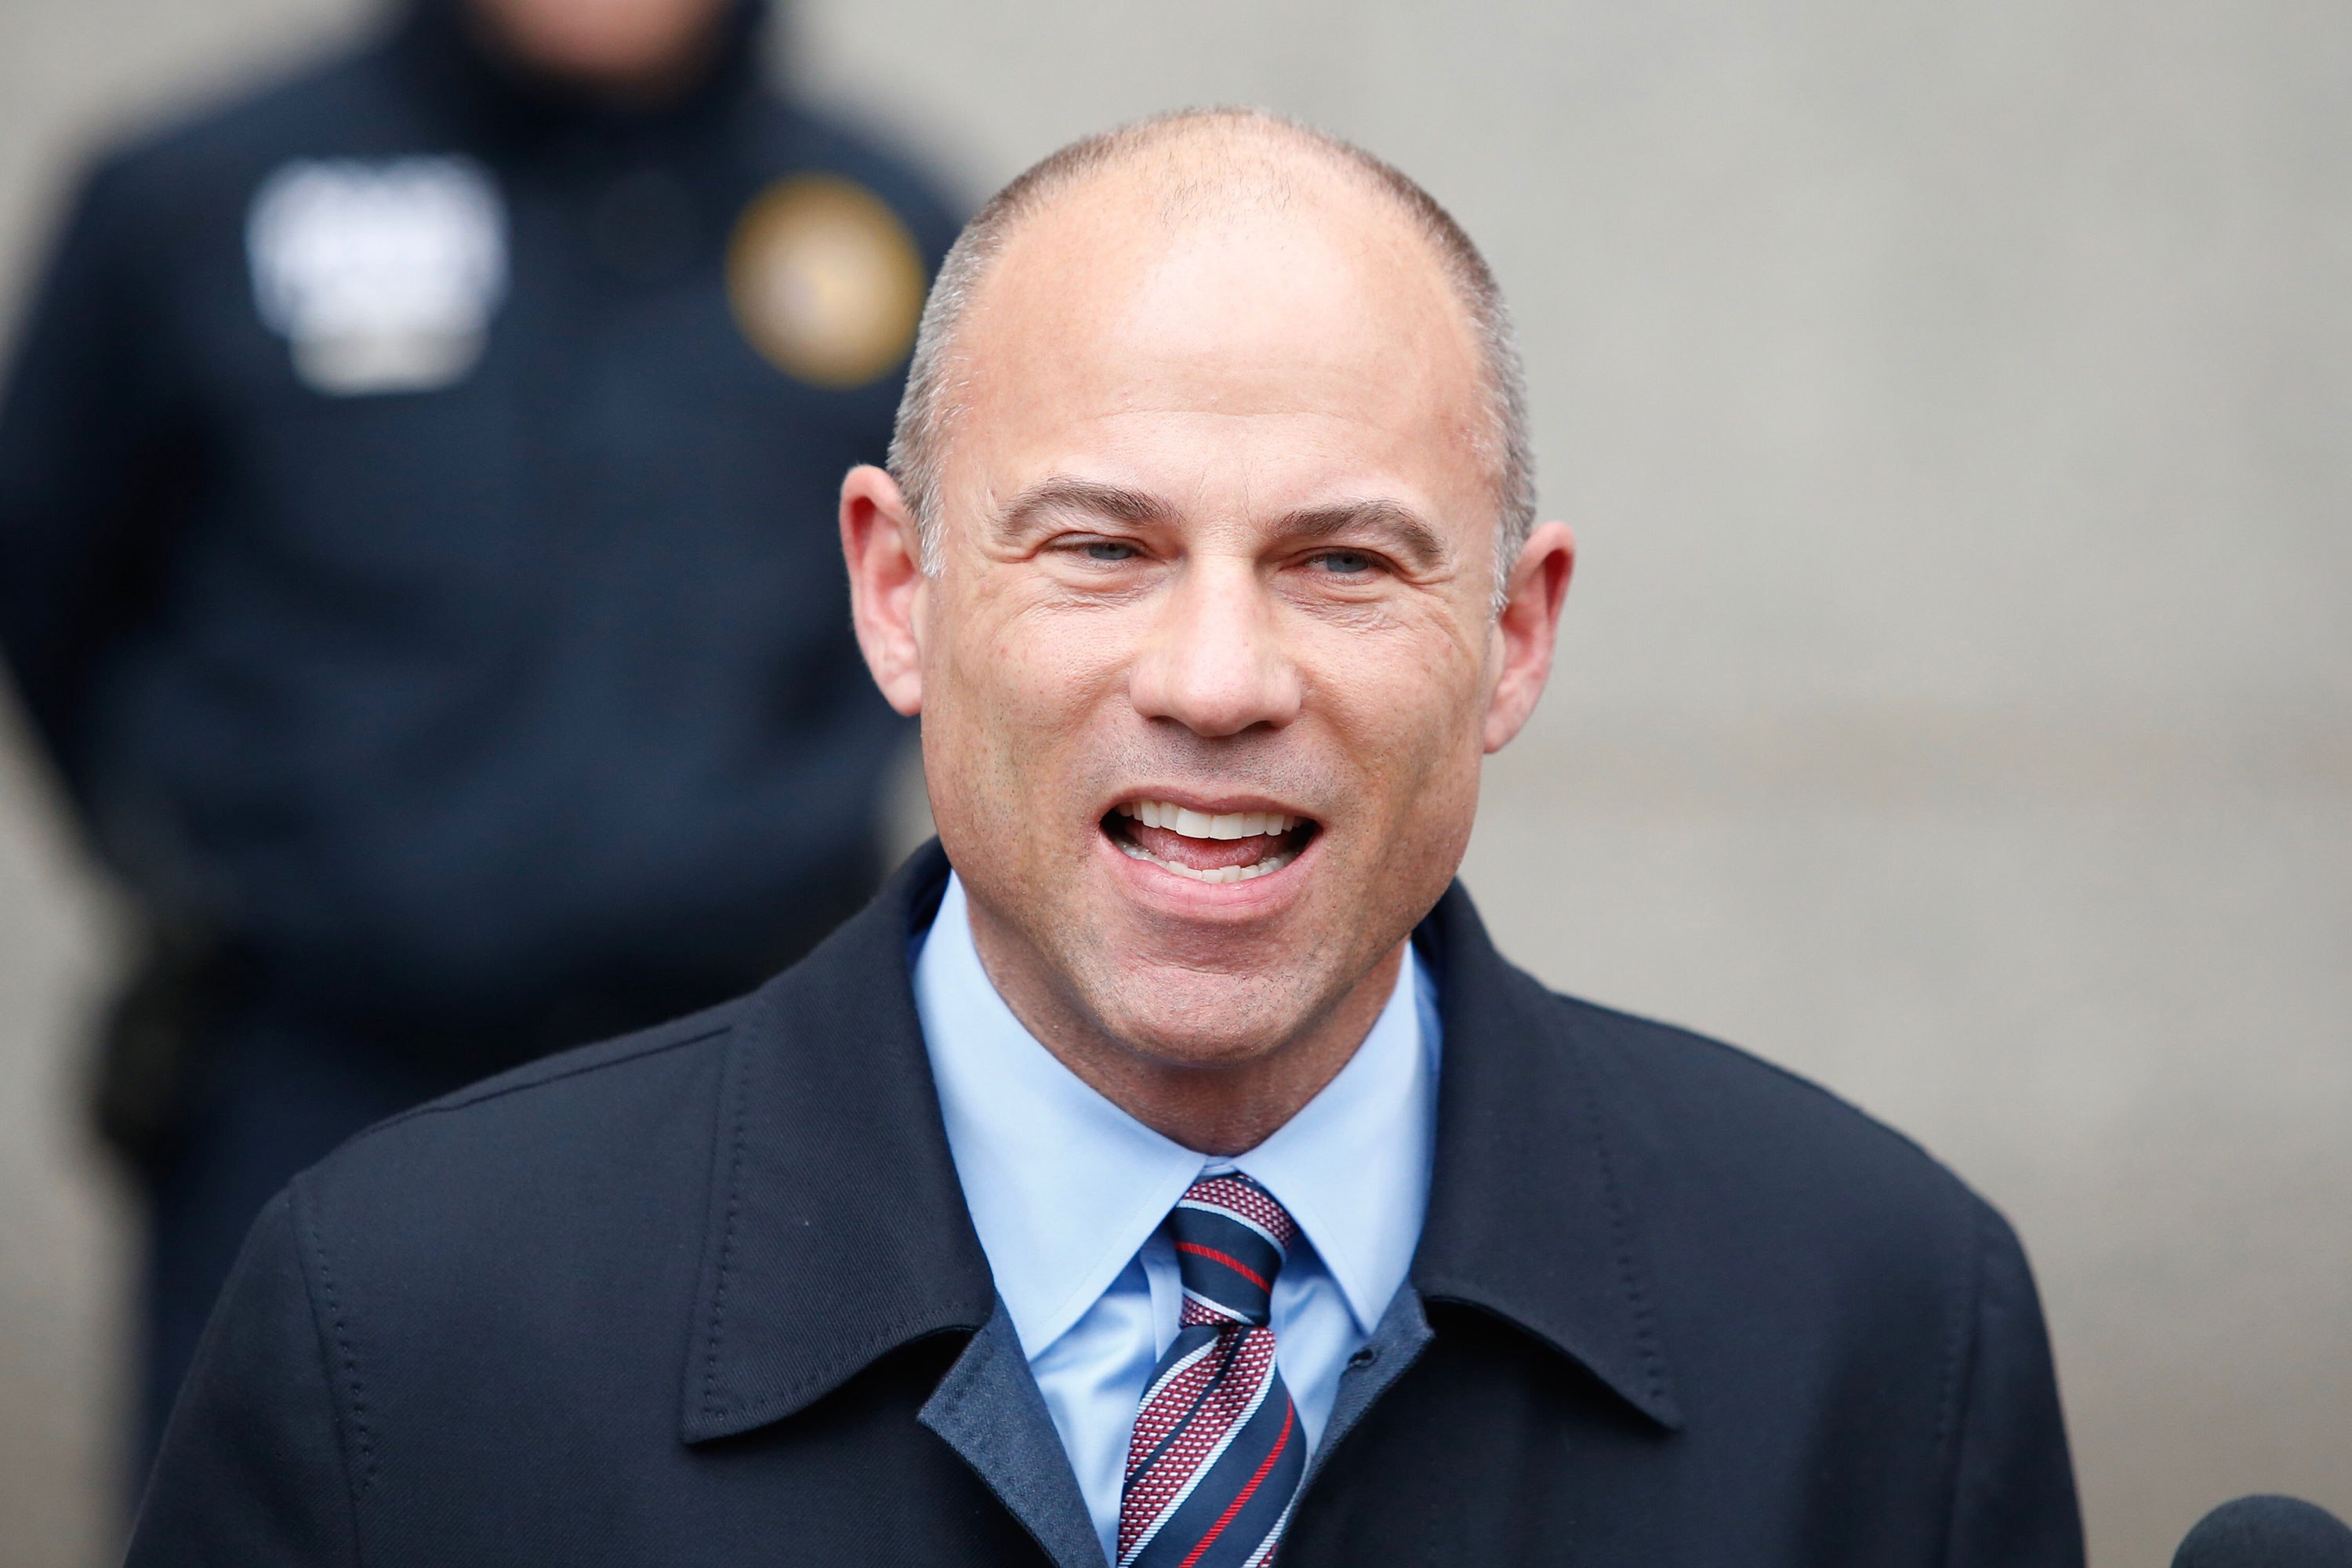 Prosecutor declines to charge Avenatti, will hold hearings on abuse claim